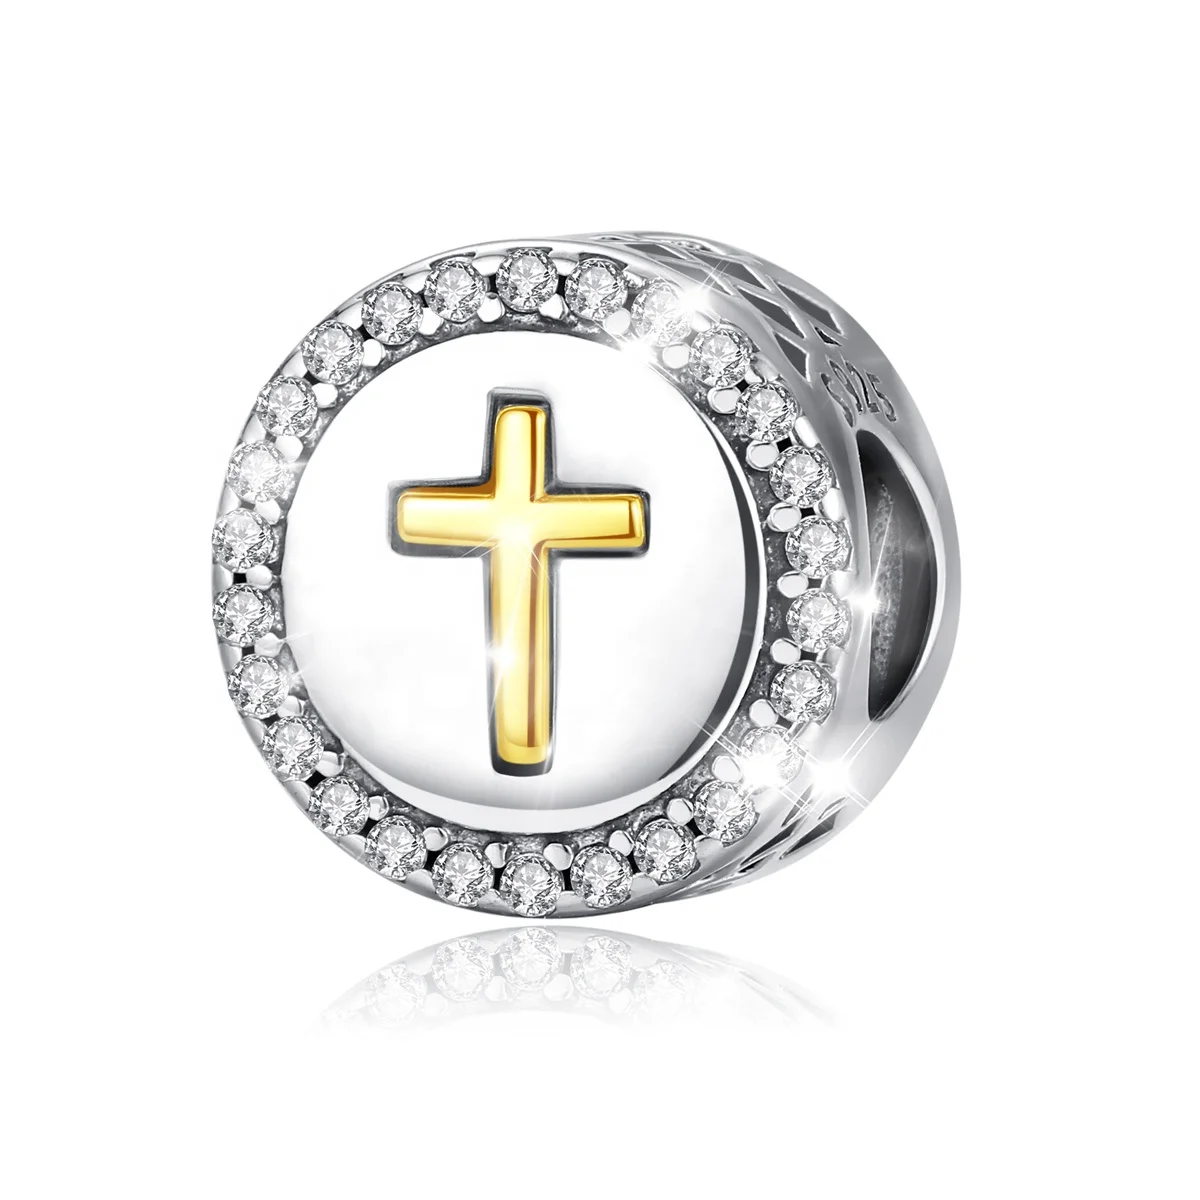 
Isunni DIY Jewelry Oblate Round Gold Plated Cross Embossment Design S925 Sterling Sliver Metal Spacer Beads For Bracelets 